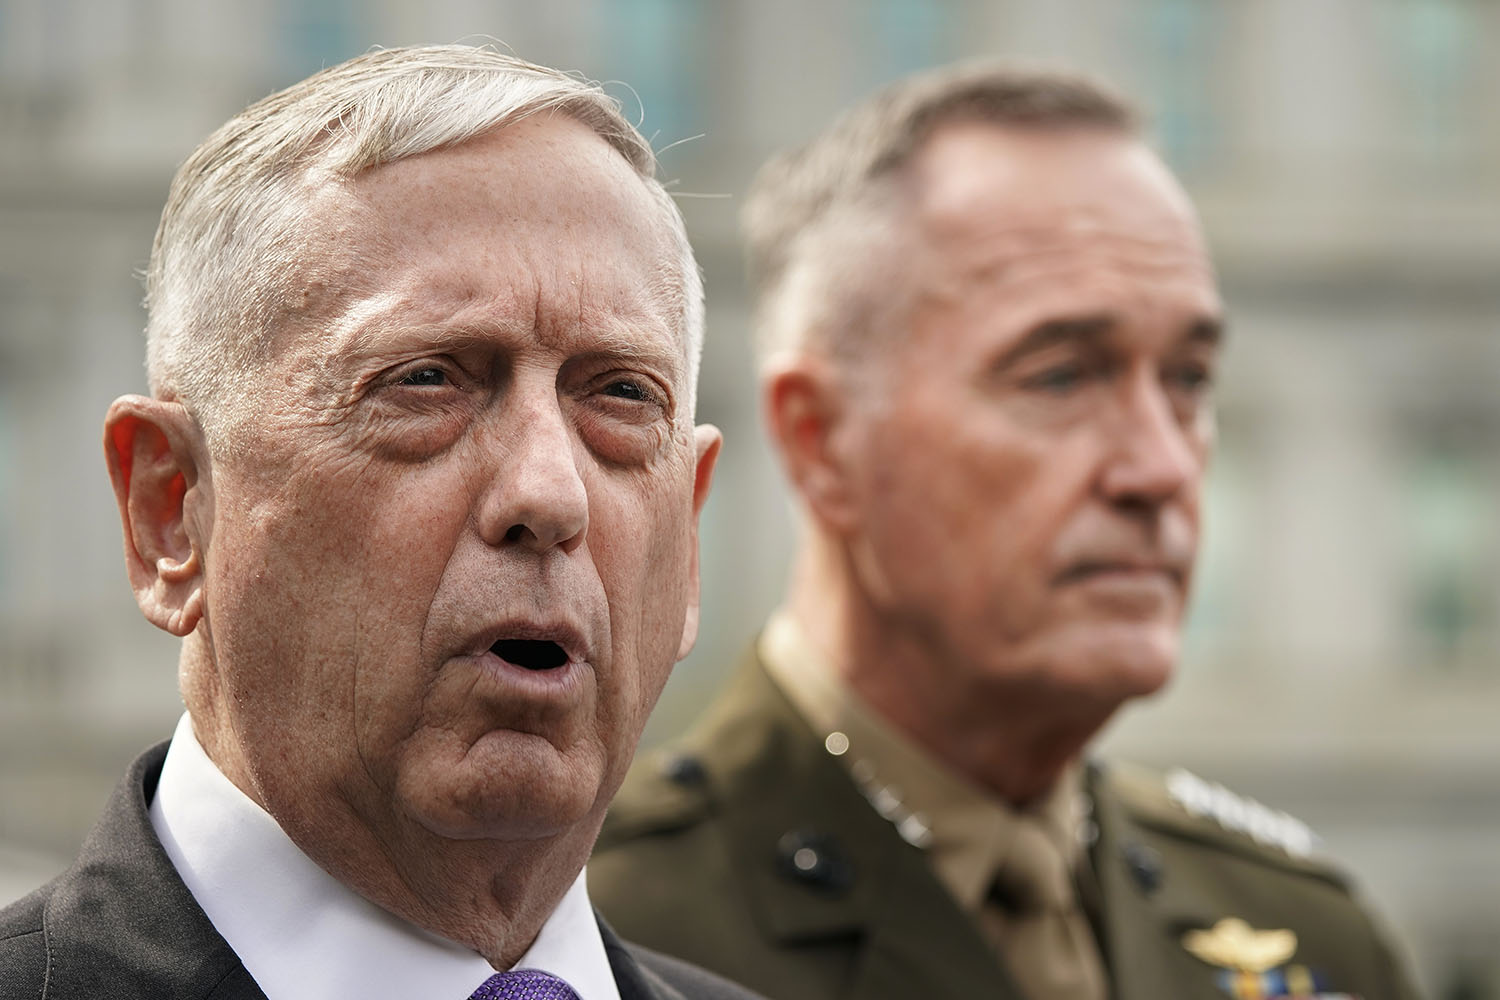 Defense Secretary Jim Mattis, left, accompanied by Joint Chiefs Chairman Gen. Joseph Dunford, right, speaks to members of the media outside the West Wing of the White House in Washington, Sunday, Sept. 3 regarding the escalating crisis in North Korea's nuclear threats. (Pablo Martinez Monsivais/AP)